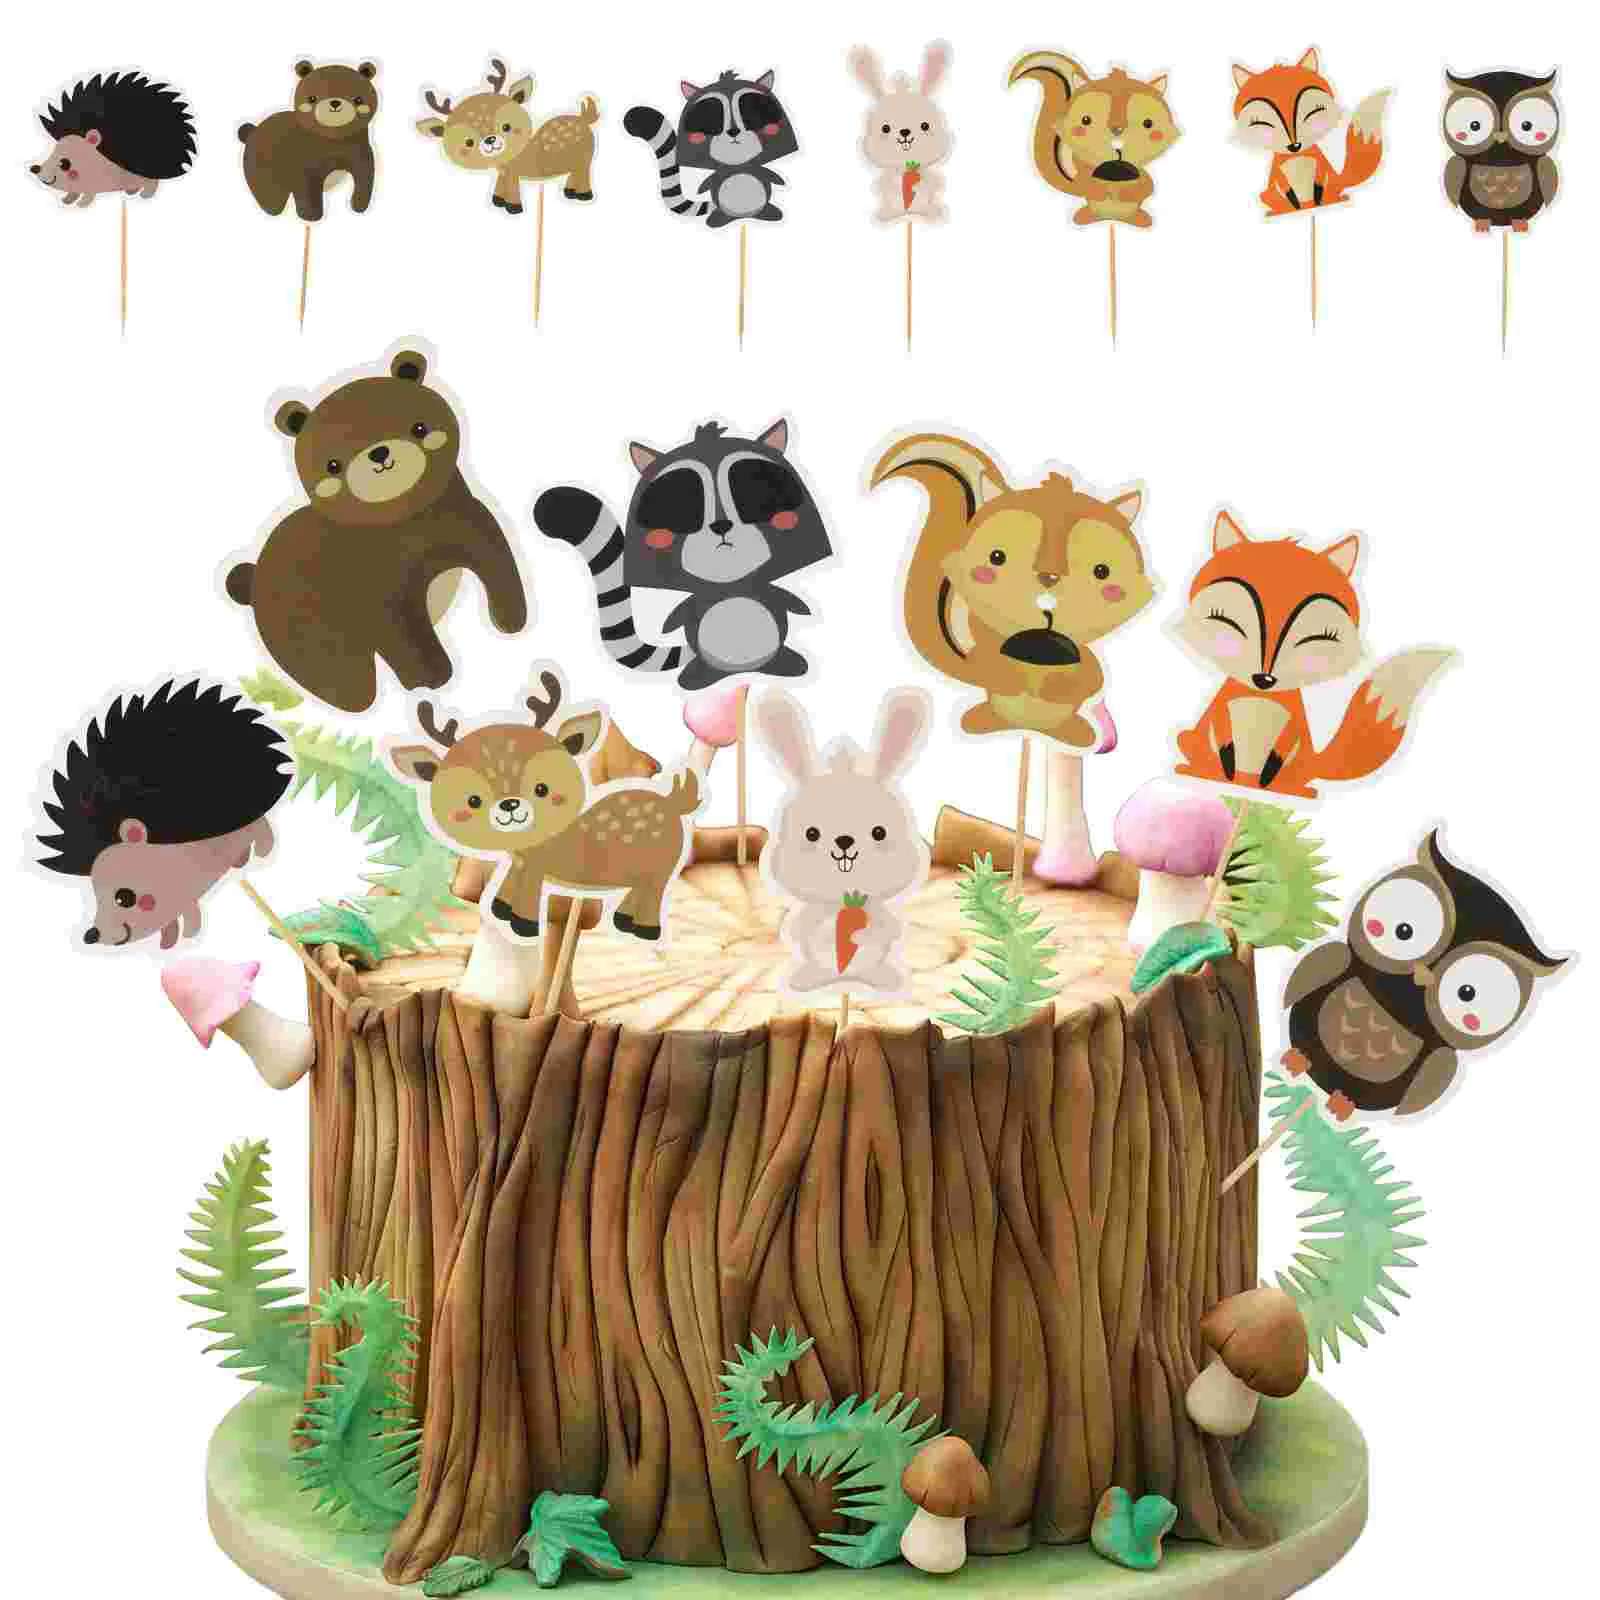 

24pcs Woodland Animals Cake Toppers Creative Cake Picks Cupcake Toppers Ornaments Dessert Decorations